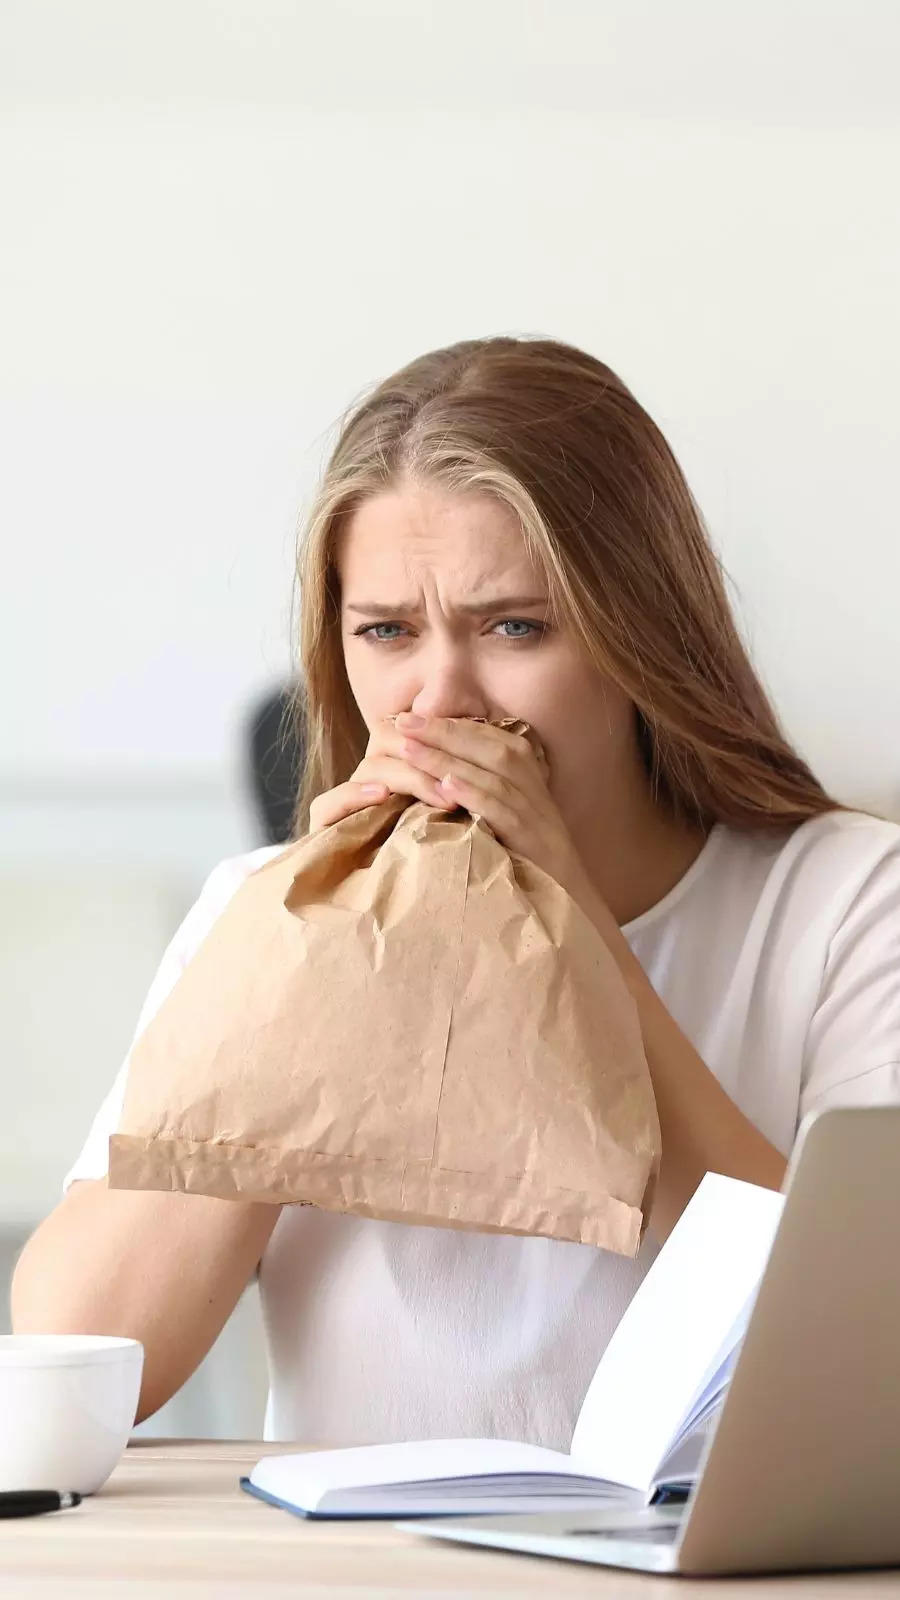 Why Breathing Into a Paper Bag Can Be Harmful - YouTube